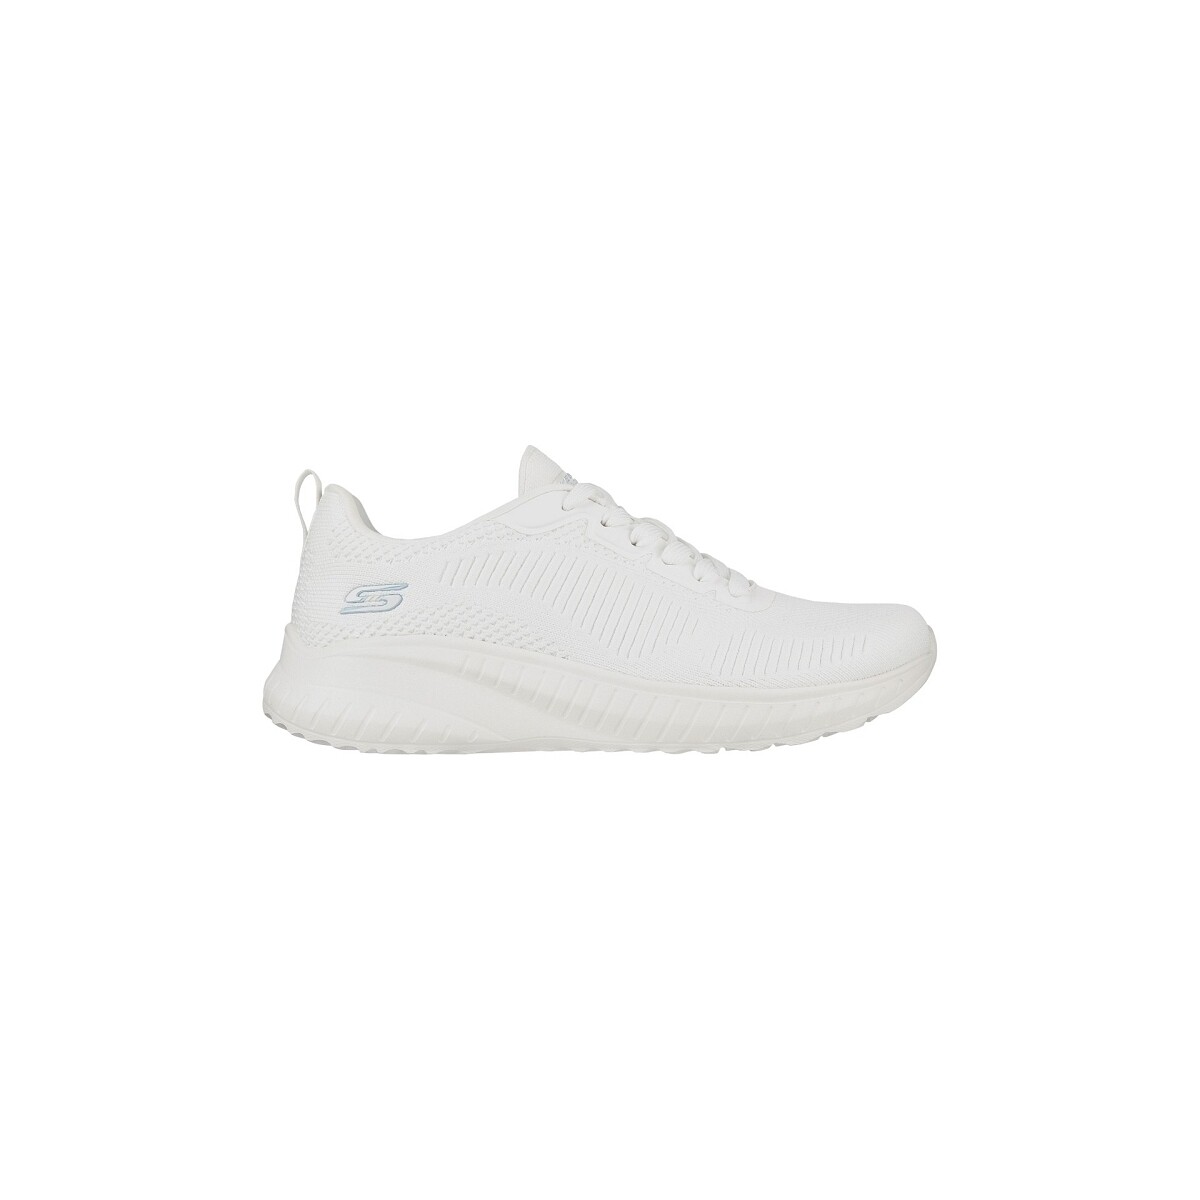 Scarpe Donna Sneakers Skechers BOBS SQUAD CHAOS - FACE O Bianco